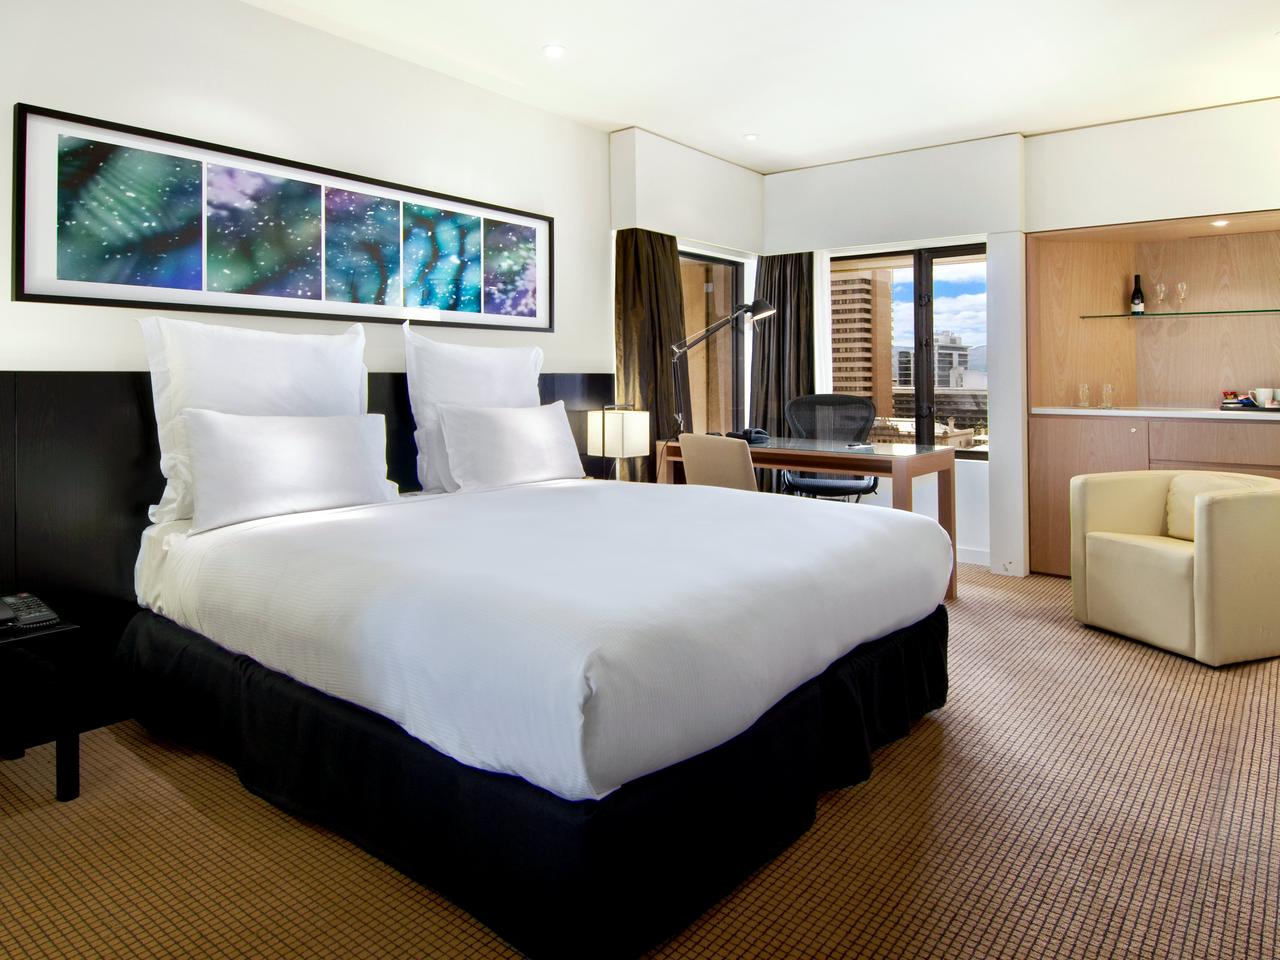 The Deluxe Room at Hilton Adelaide.